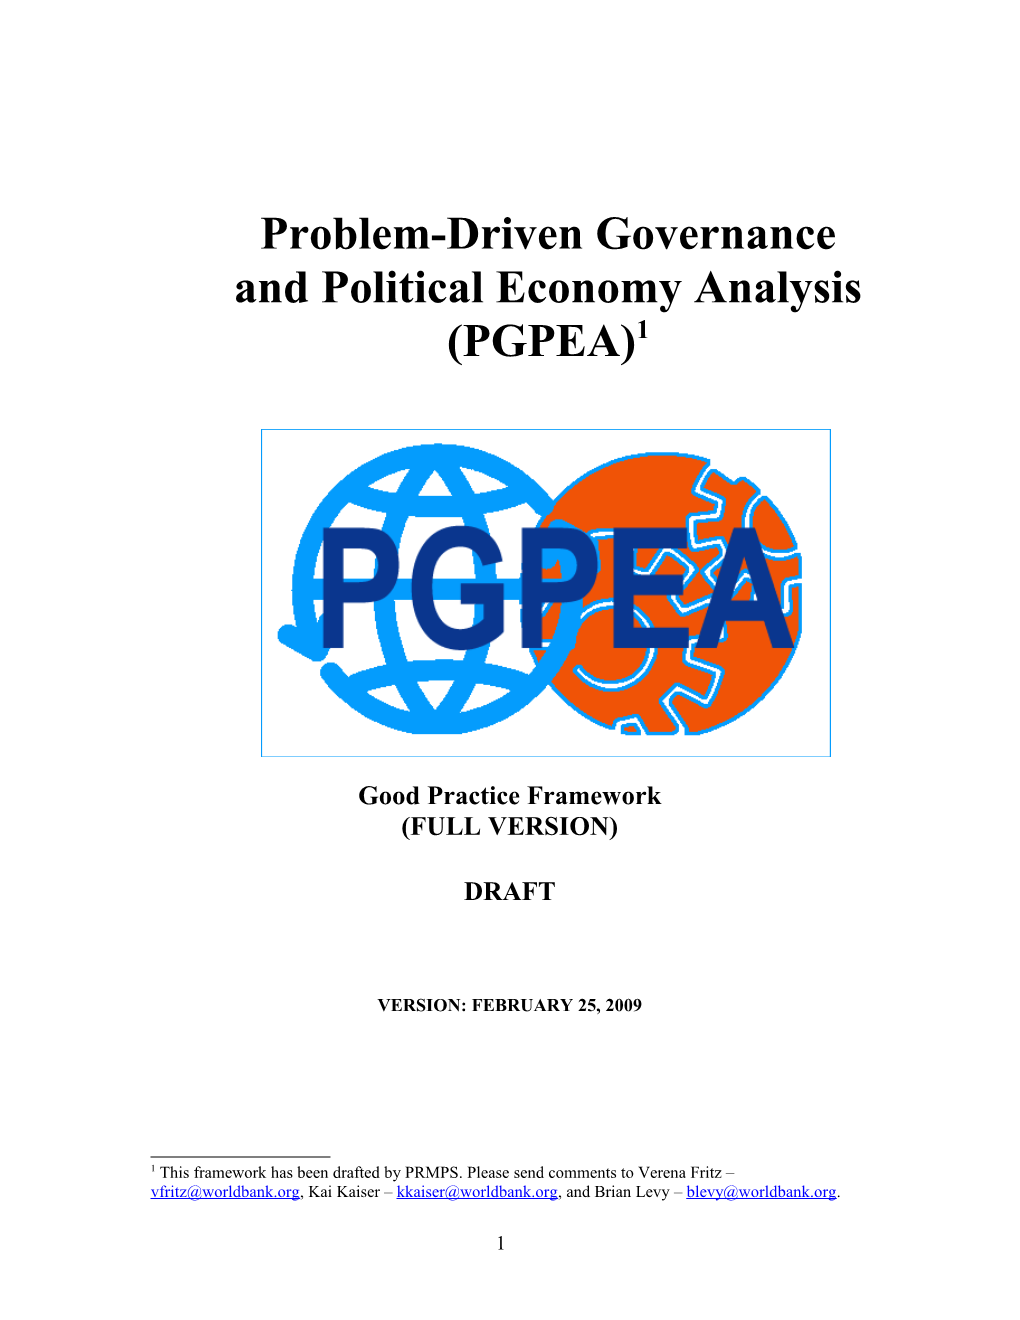 Problem-Driven Governance and Political Economy Analysis